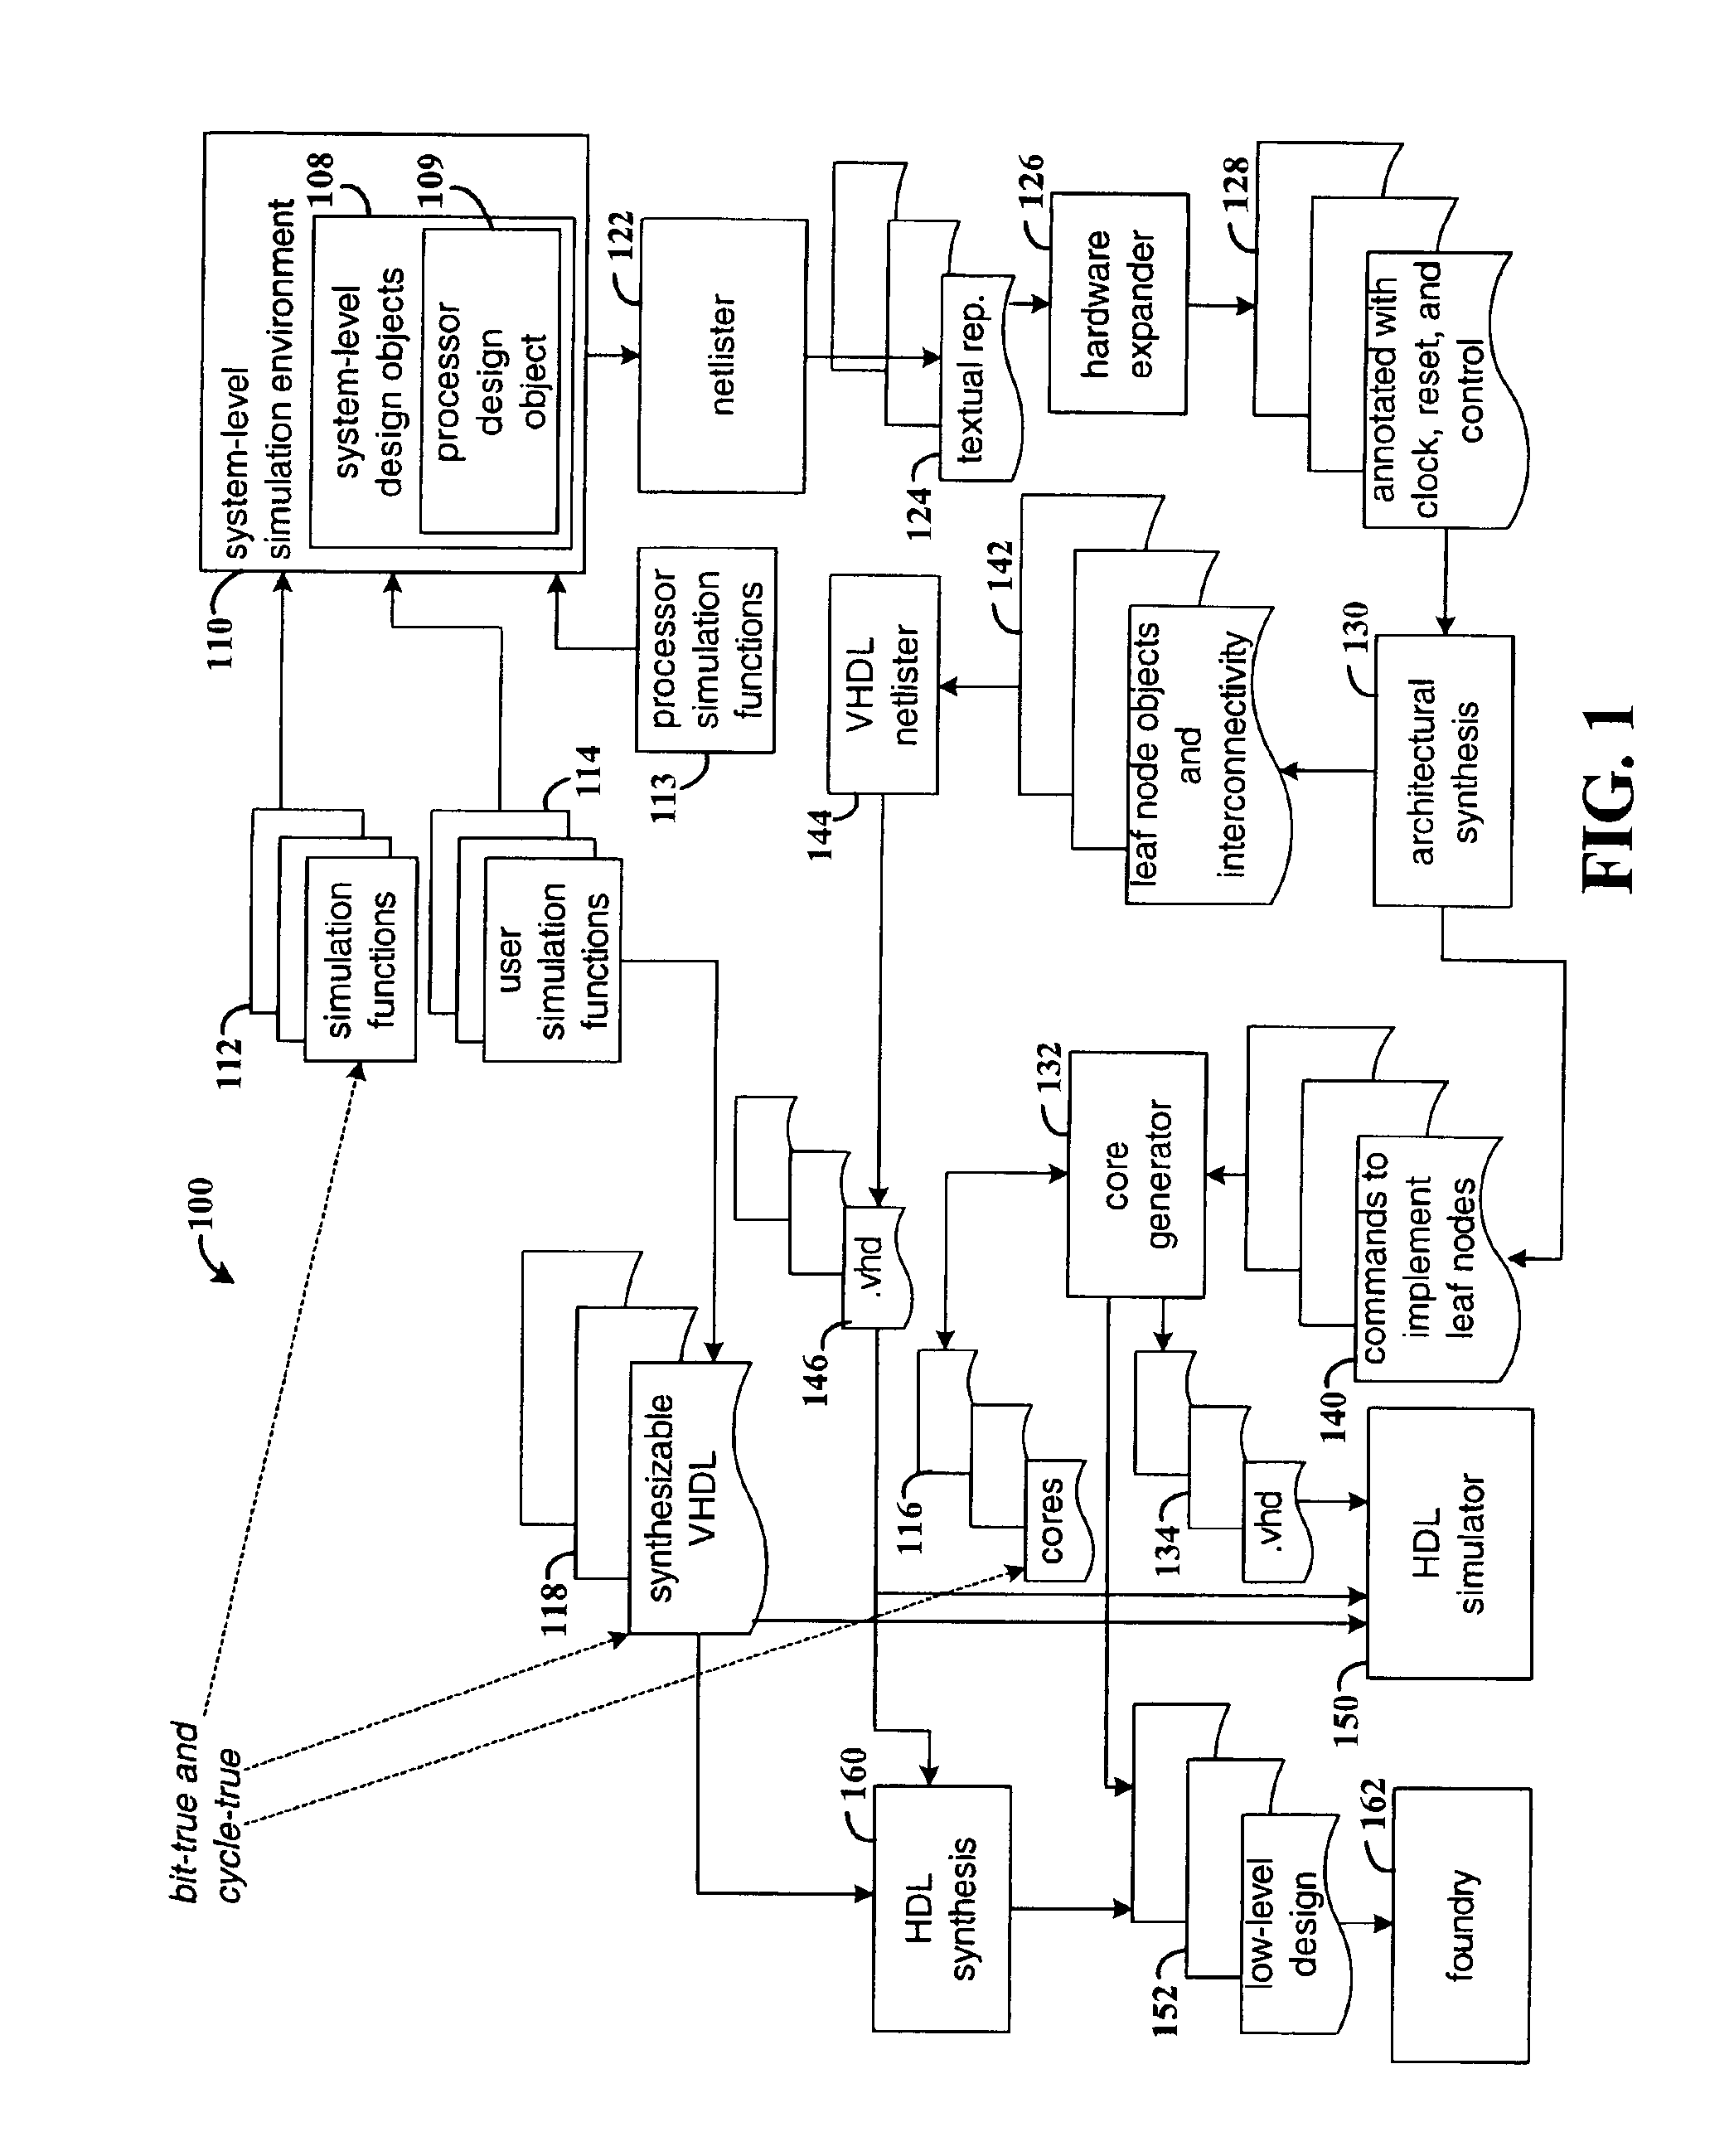 Method and system for generating a circuit design including a peripheral component connected to a bus